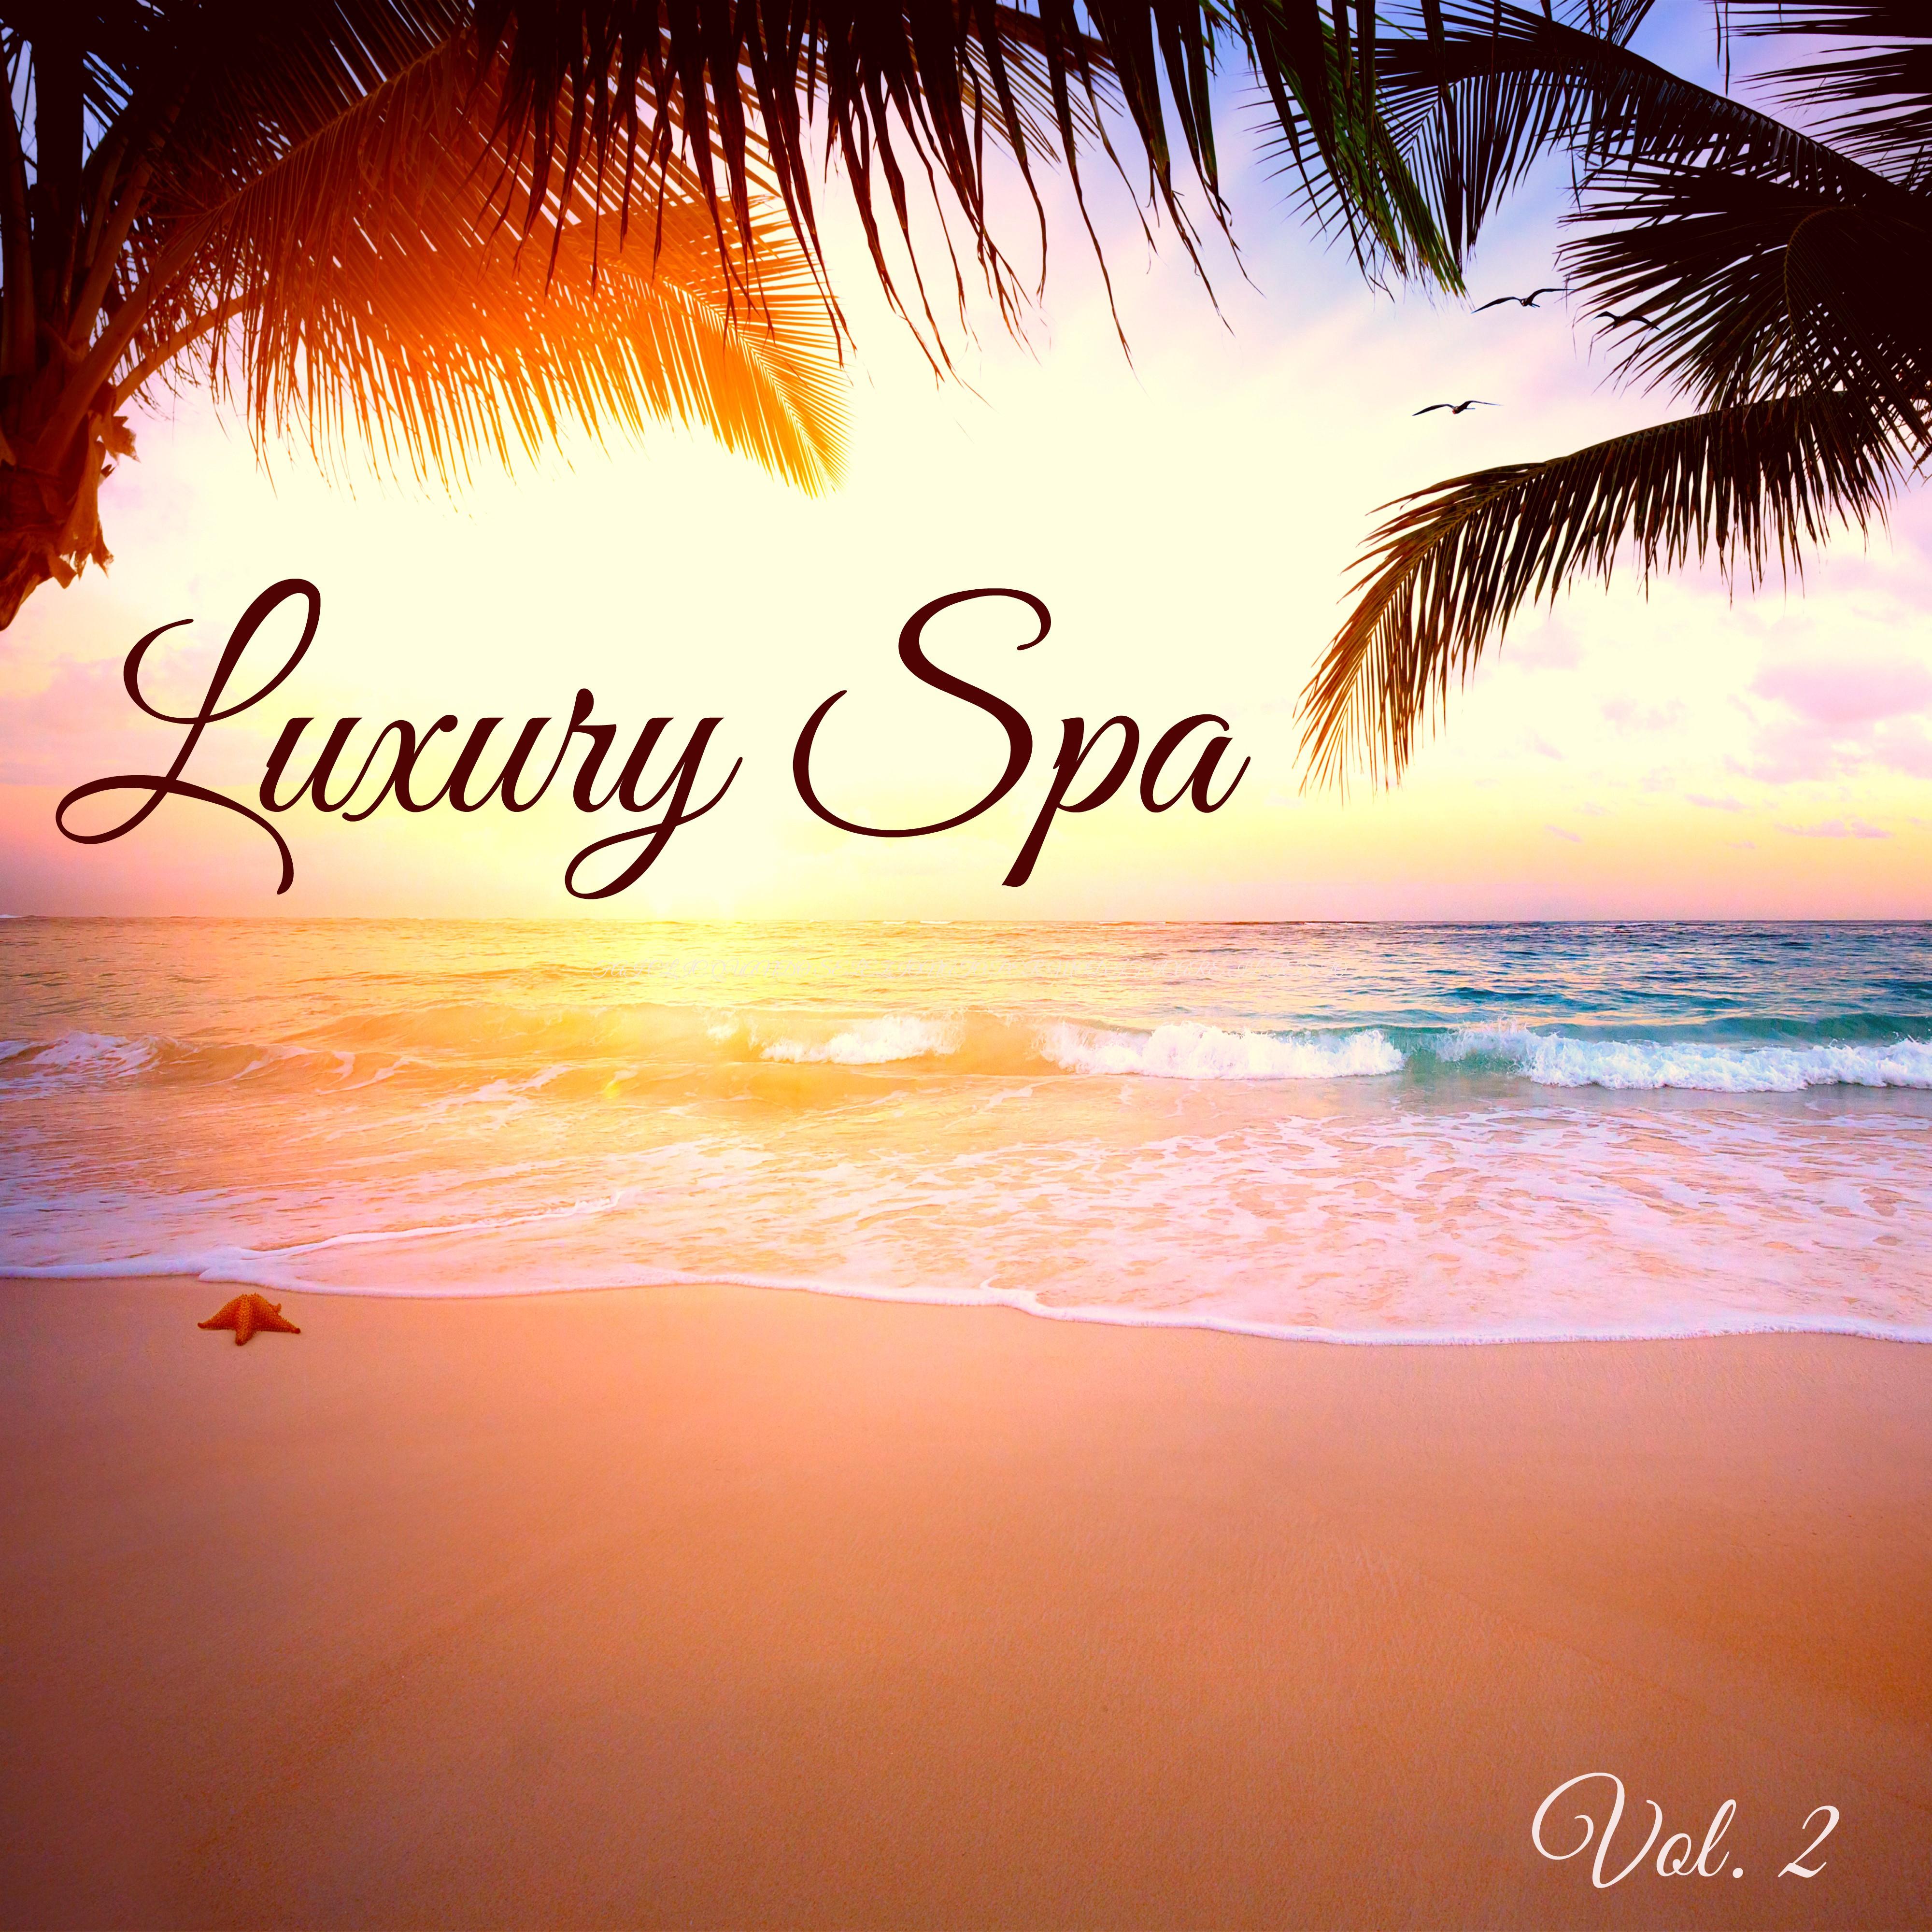 Luxury Spa, Vol. 2 – Background Instrumental Music for Massage, Relaxation, Sauna and Spa Treatments